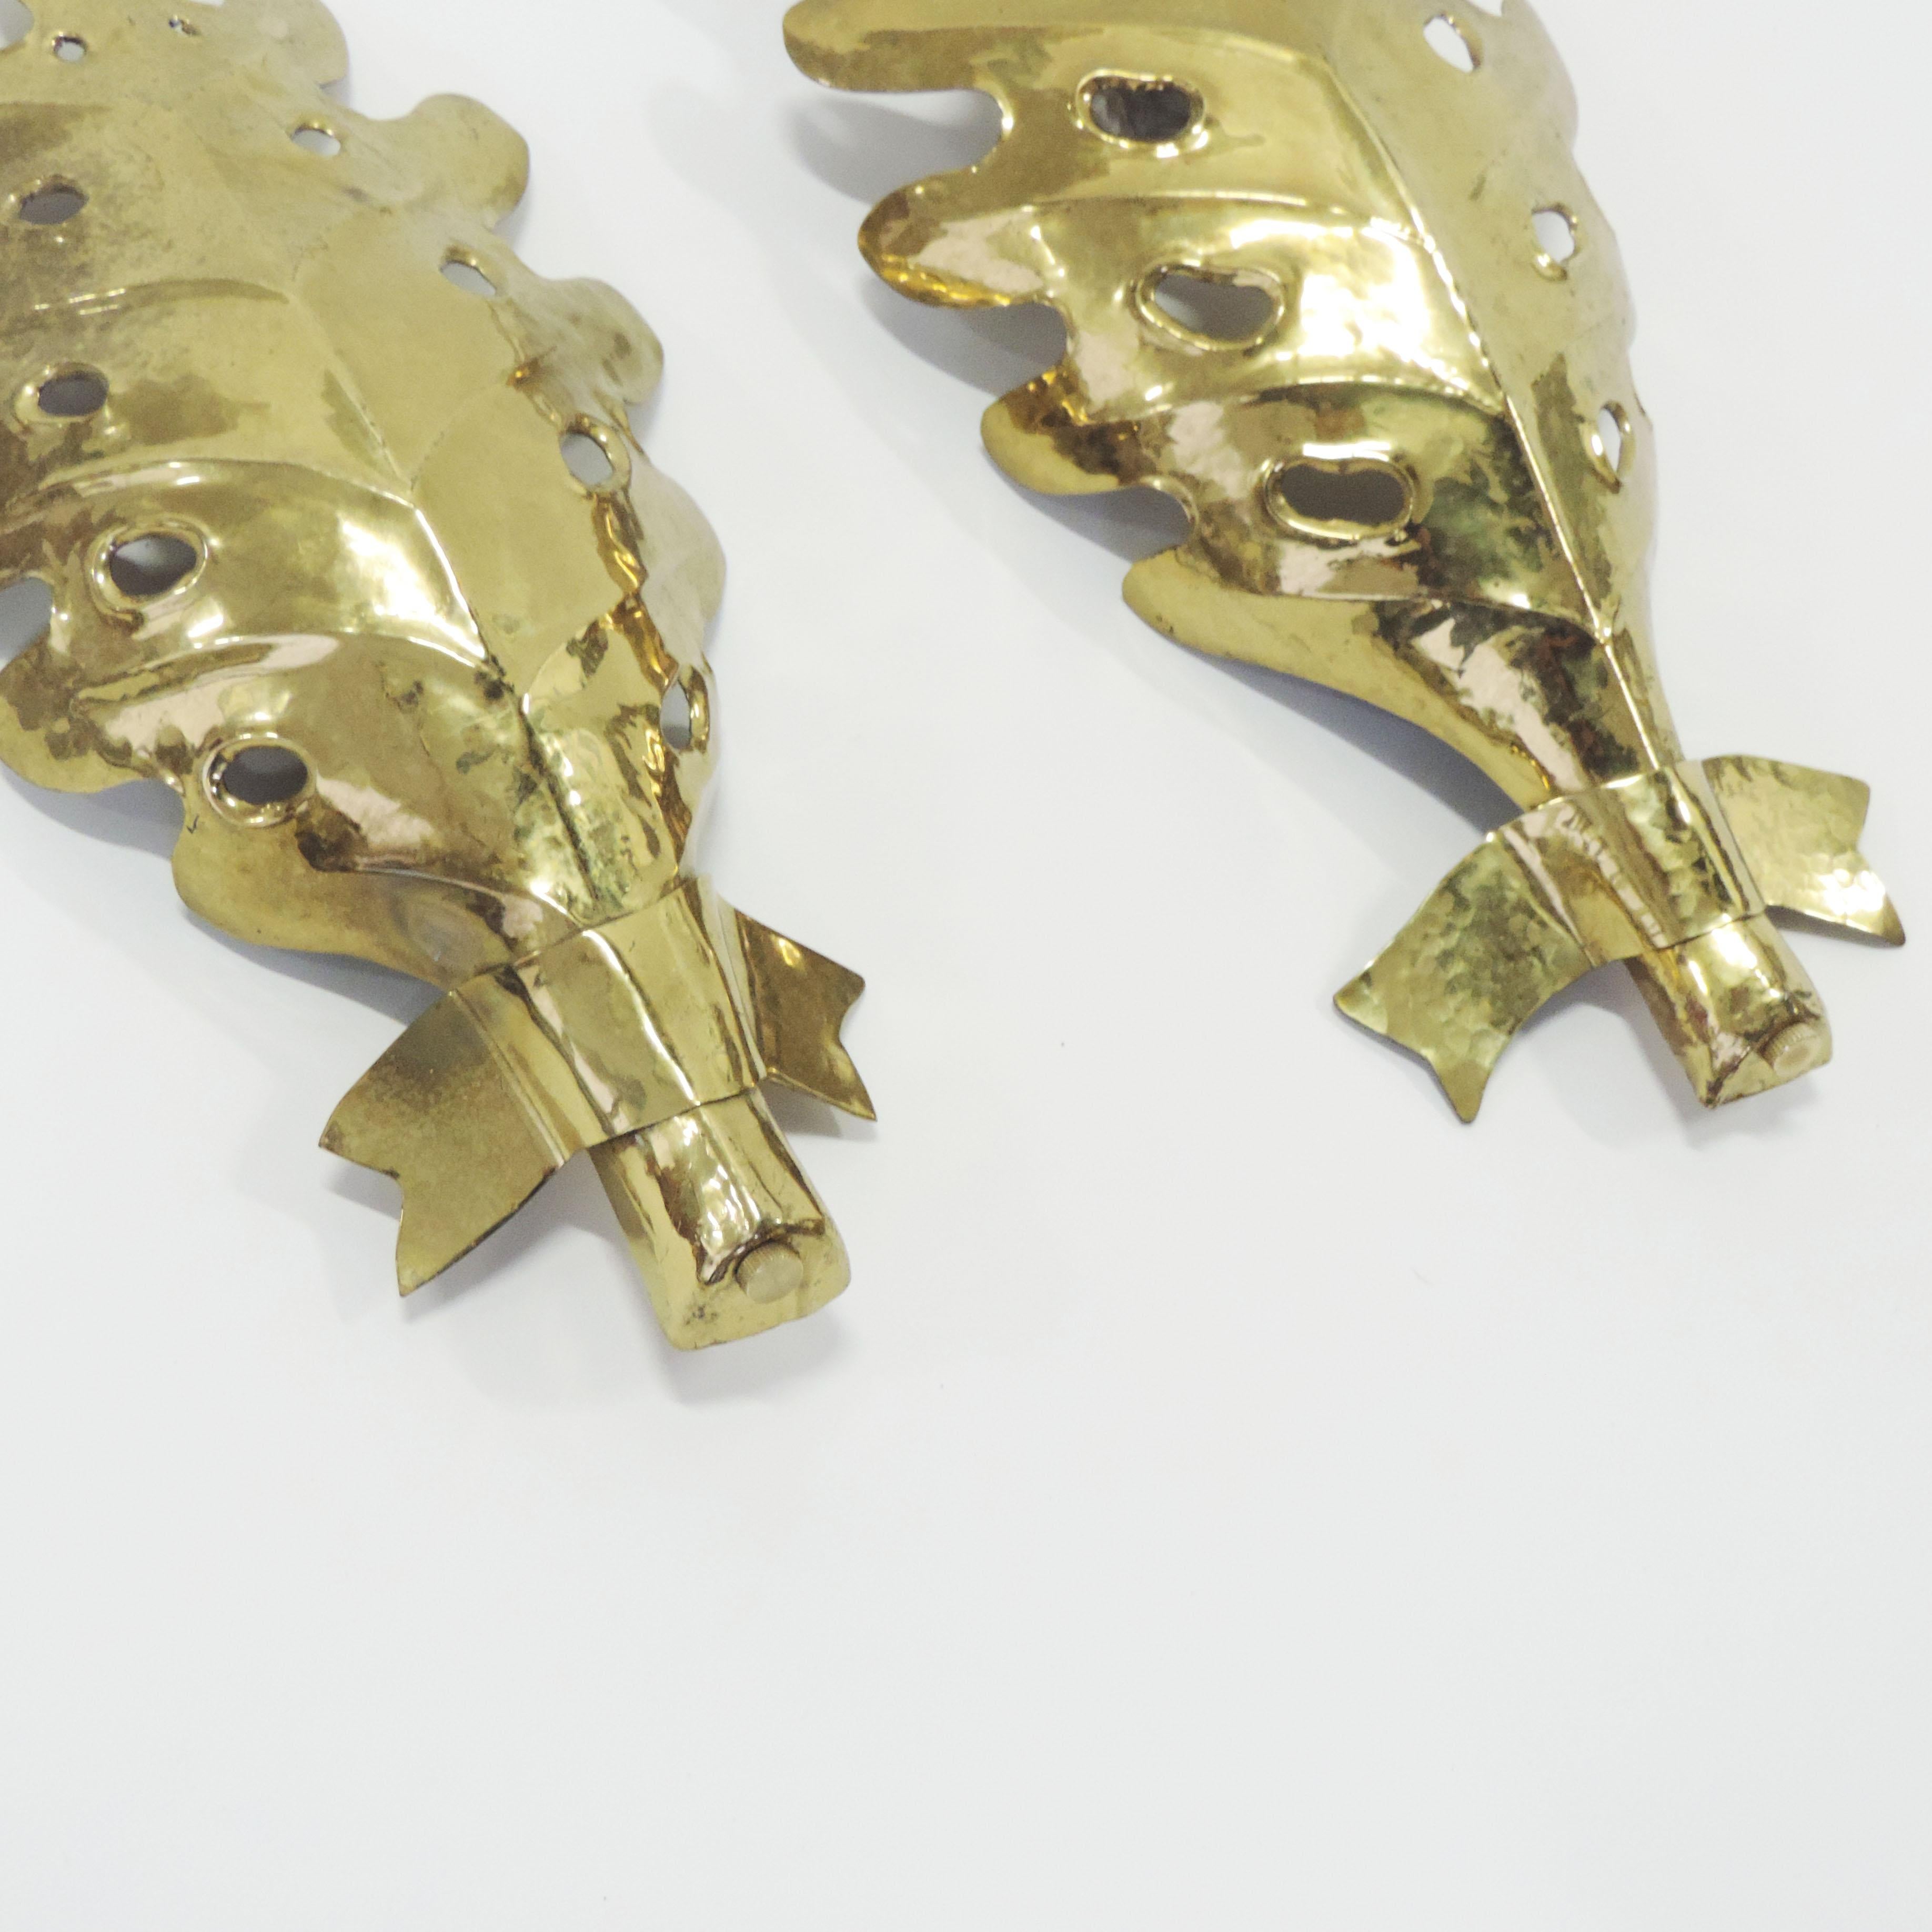 Pair of Giuseppe Ostuni brass leaf wall lamps for Oluce.
The pair is handmade and therefore differs slightly.
The second wall lamp measures H 33, W 16, D 6cm.